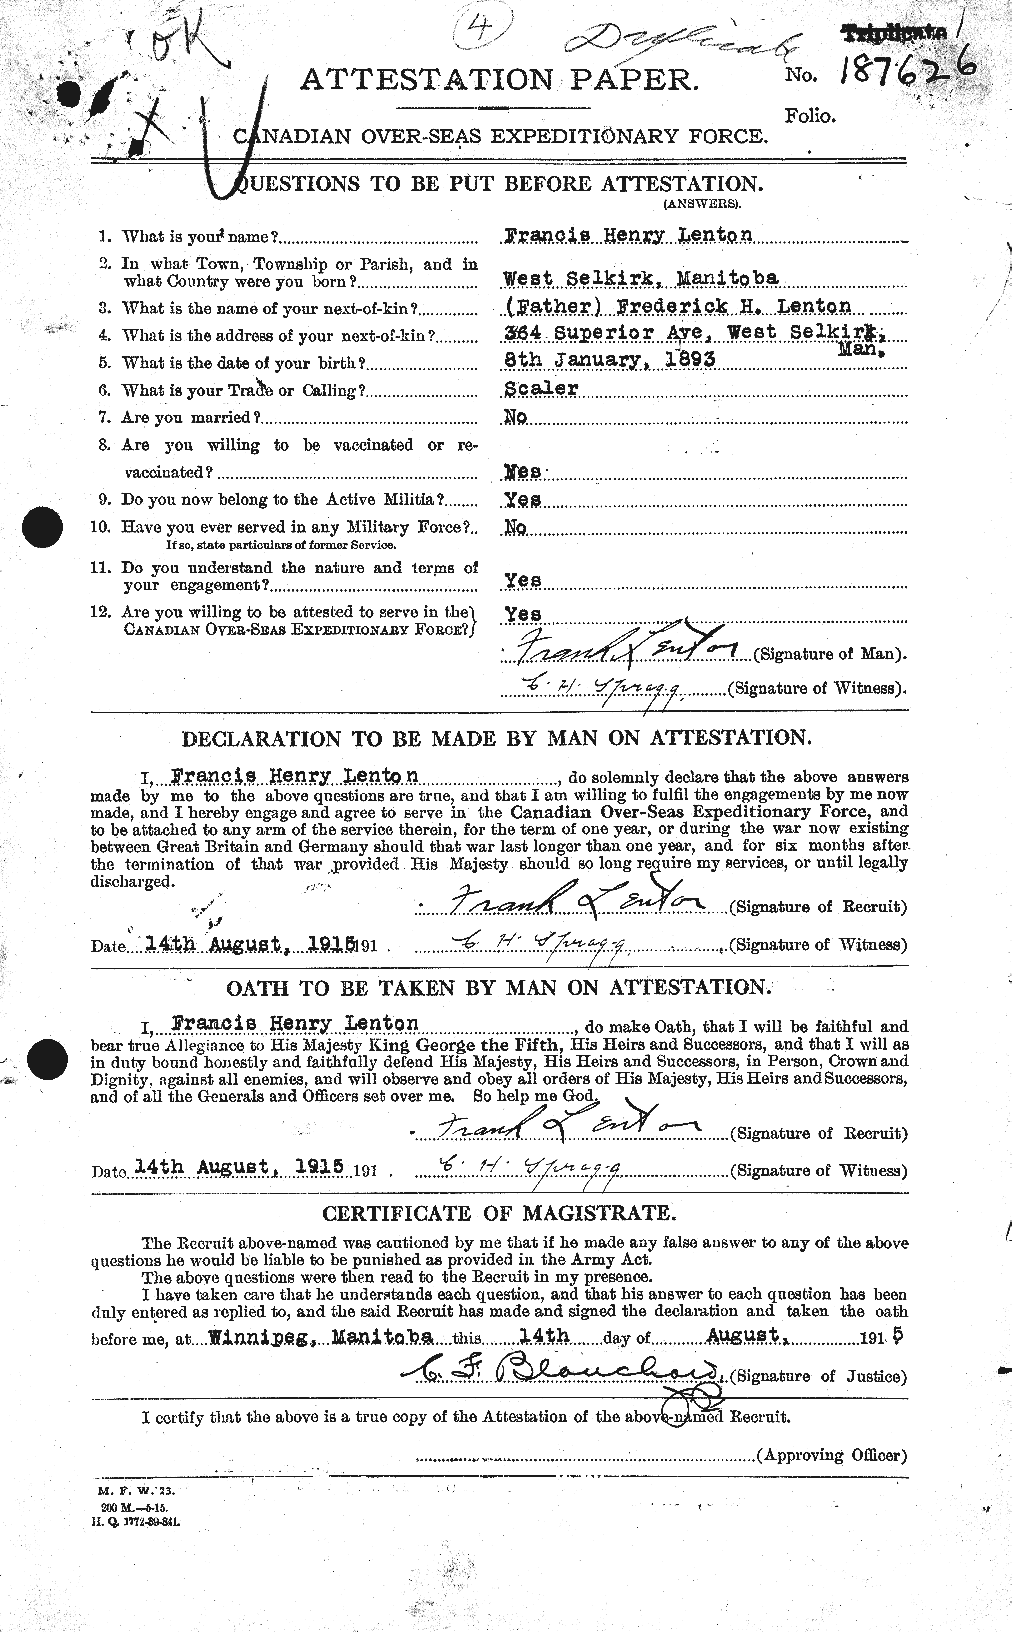 Personnel Records of the First World War - CEF 458776a